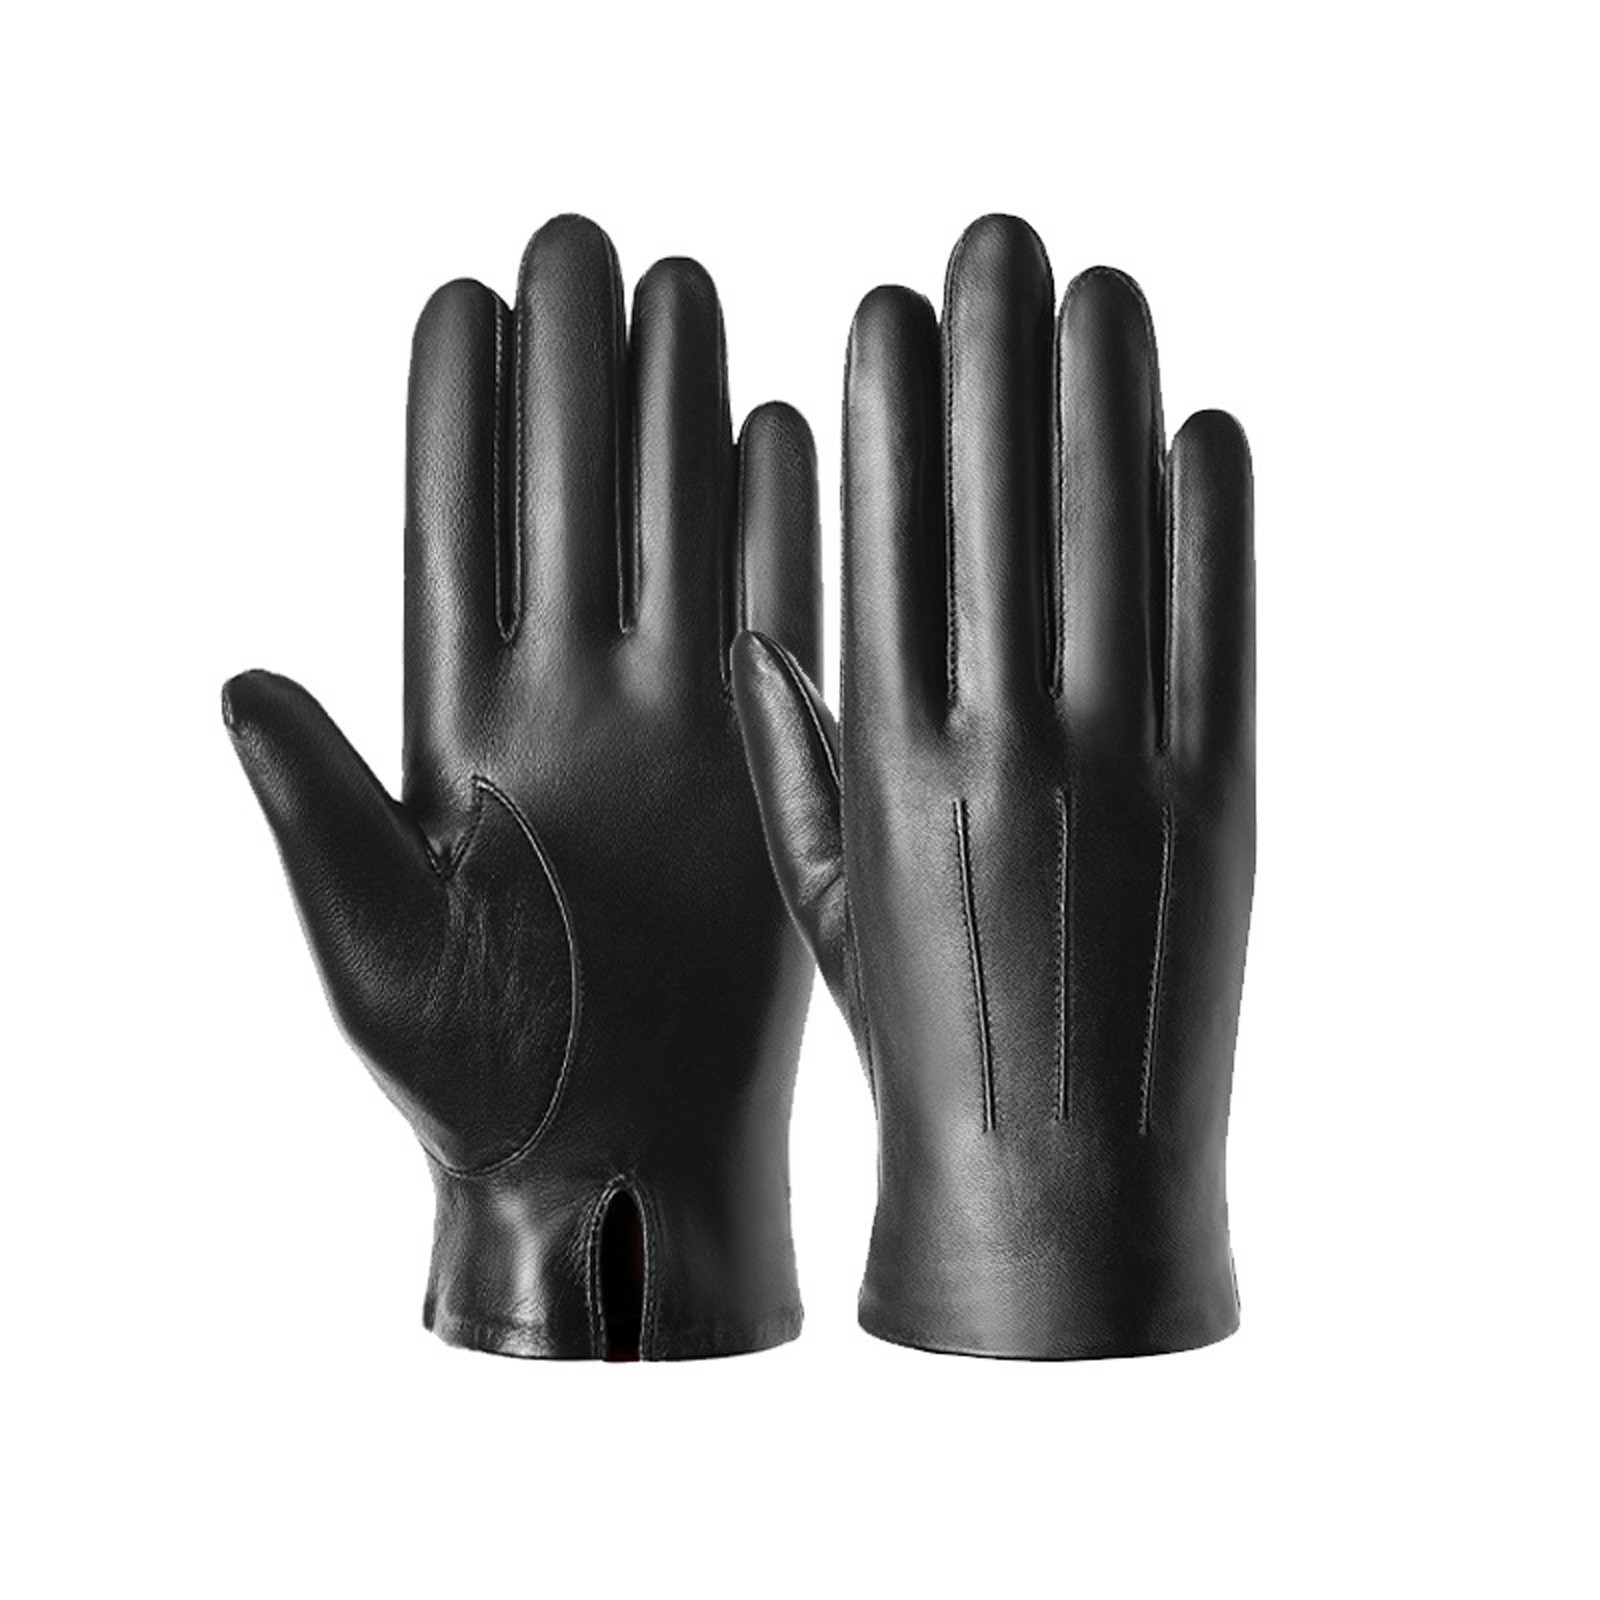 Fesfesfes Men's Leather Gloves Black Driving Leather Gloves Winter Warm ...